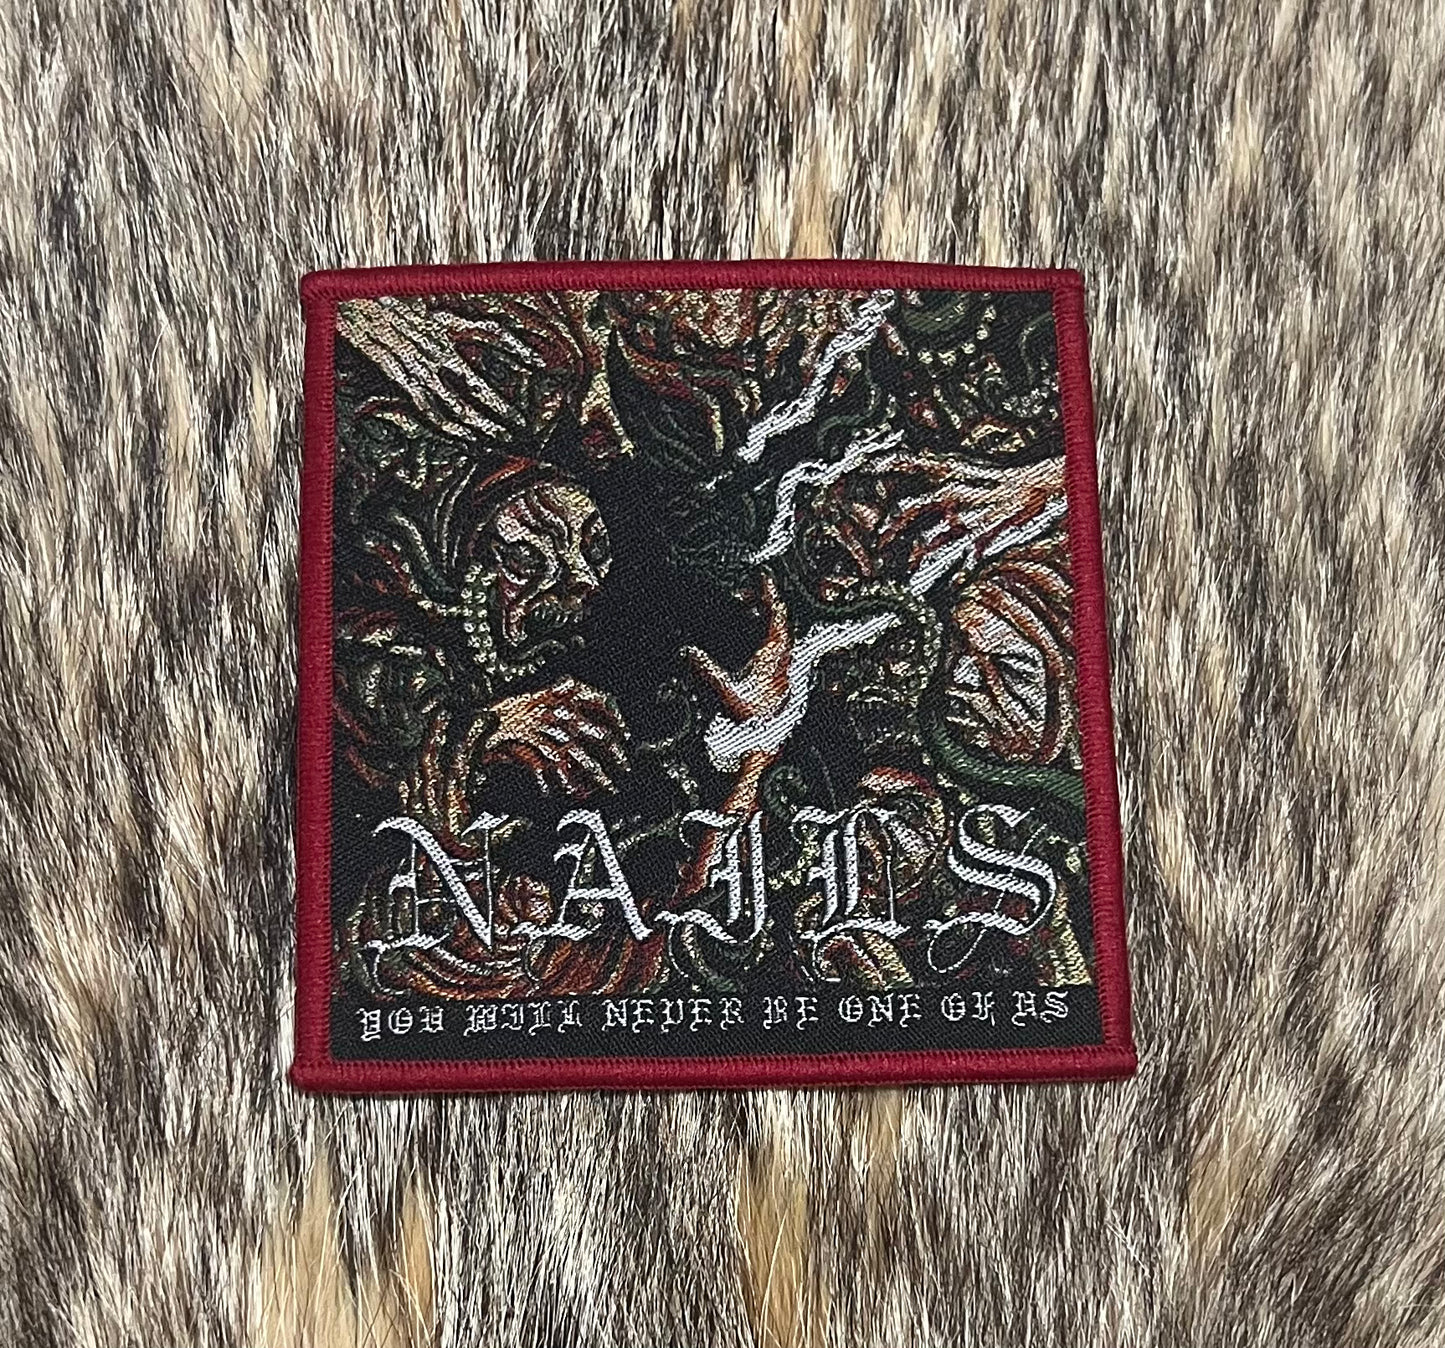 Nails - You Will Never Be One Of Us Patch